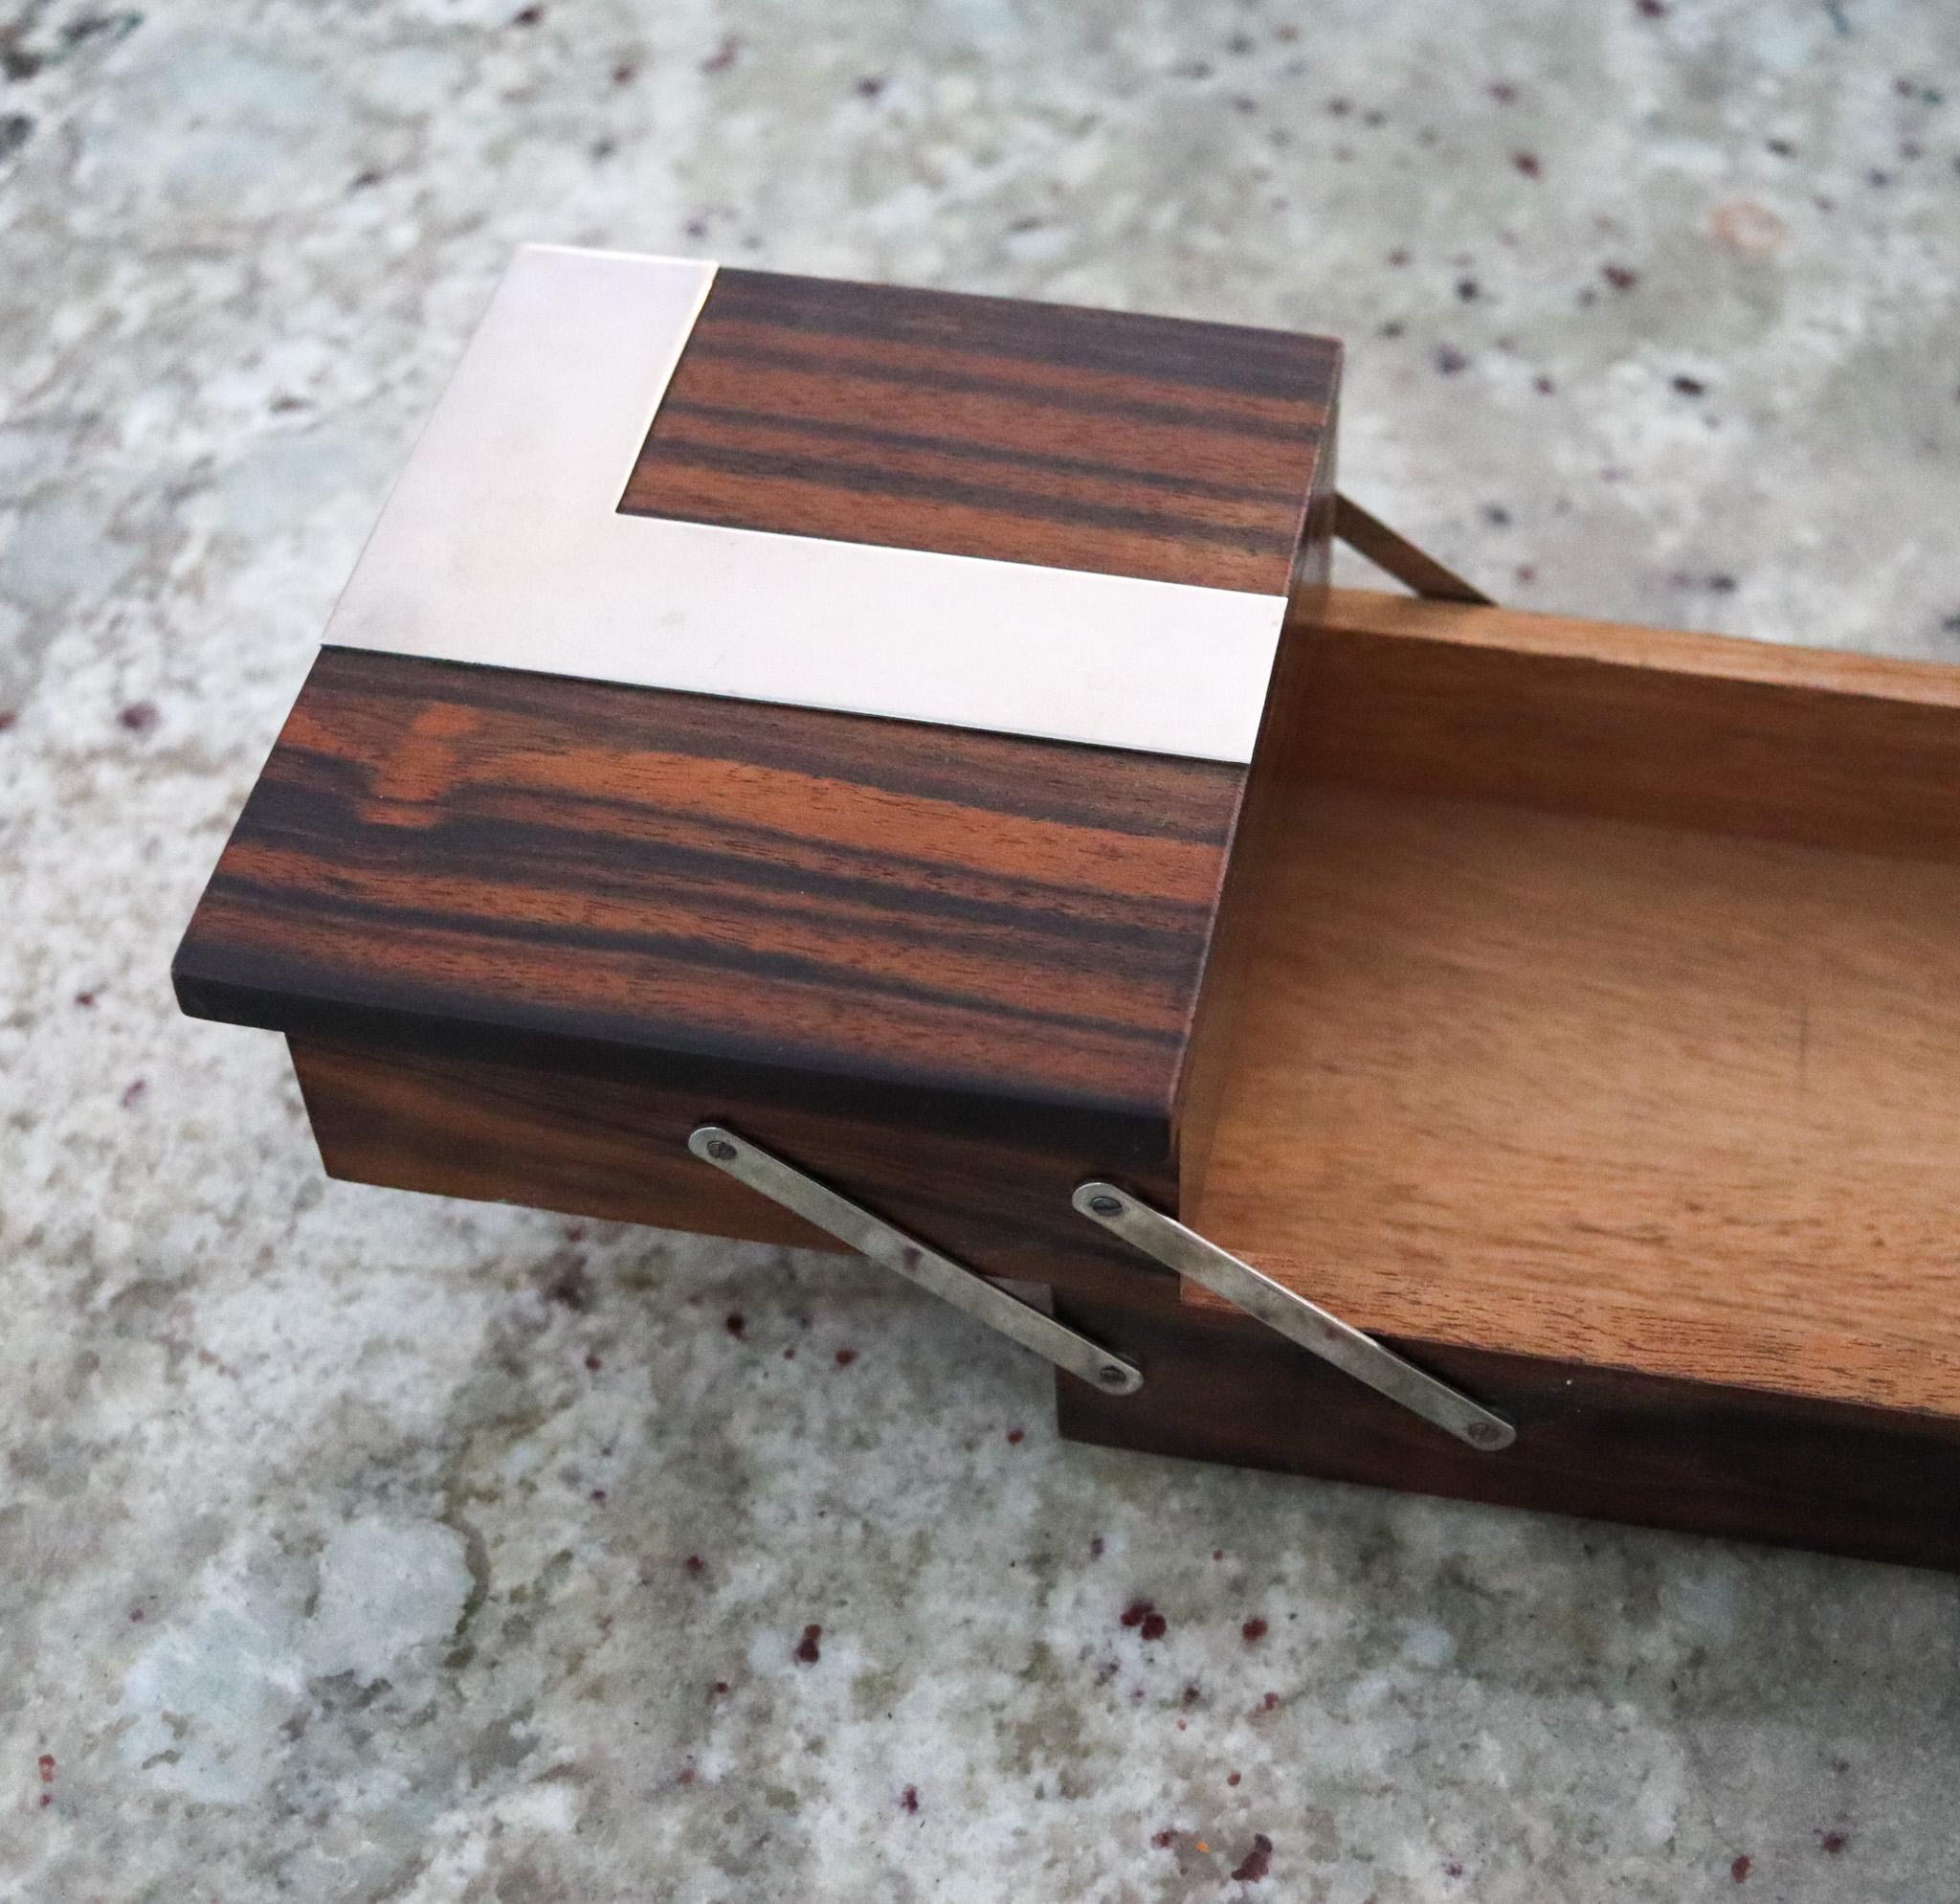 Hand-Crafted Lancel Paris 1937 Art Deco Desk Box in Macassar Ebony Wood and Chrome Steel For Sale